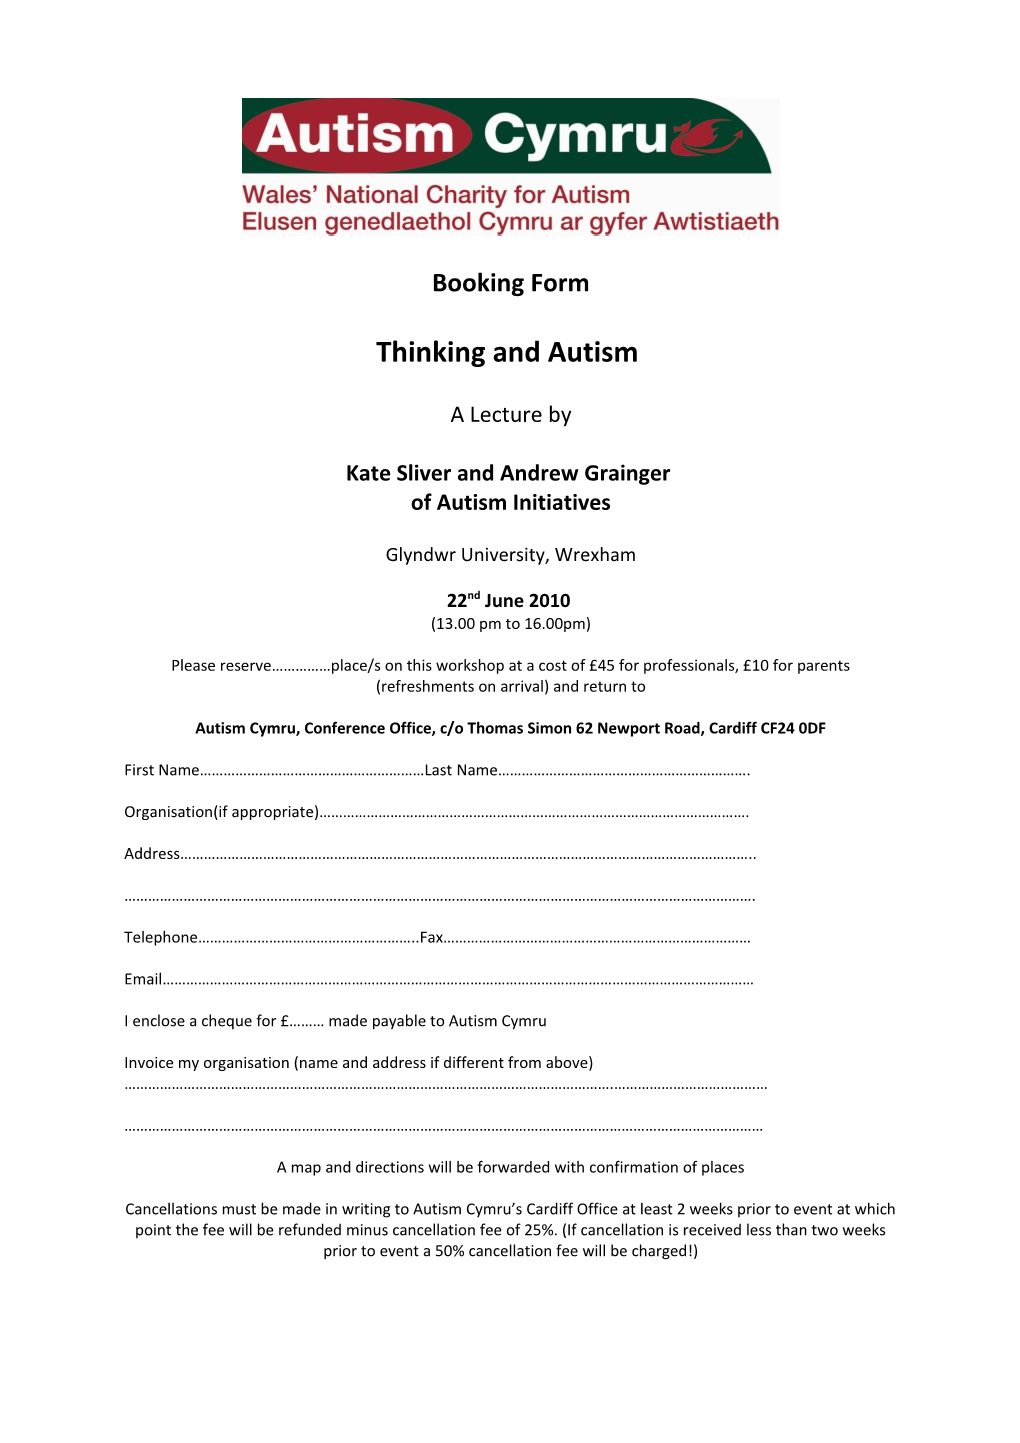 Thinking and Autism 22Nd June 2010 (Booking Form)